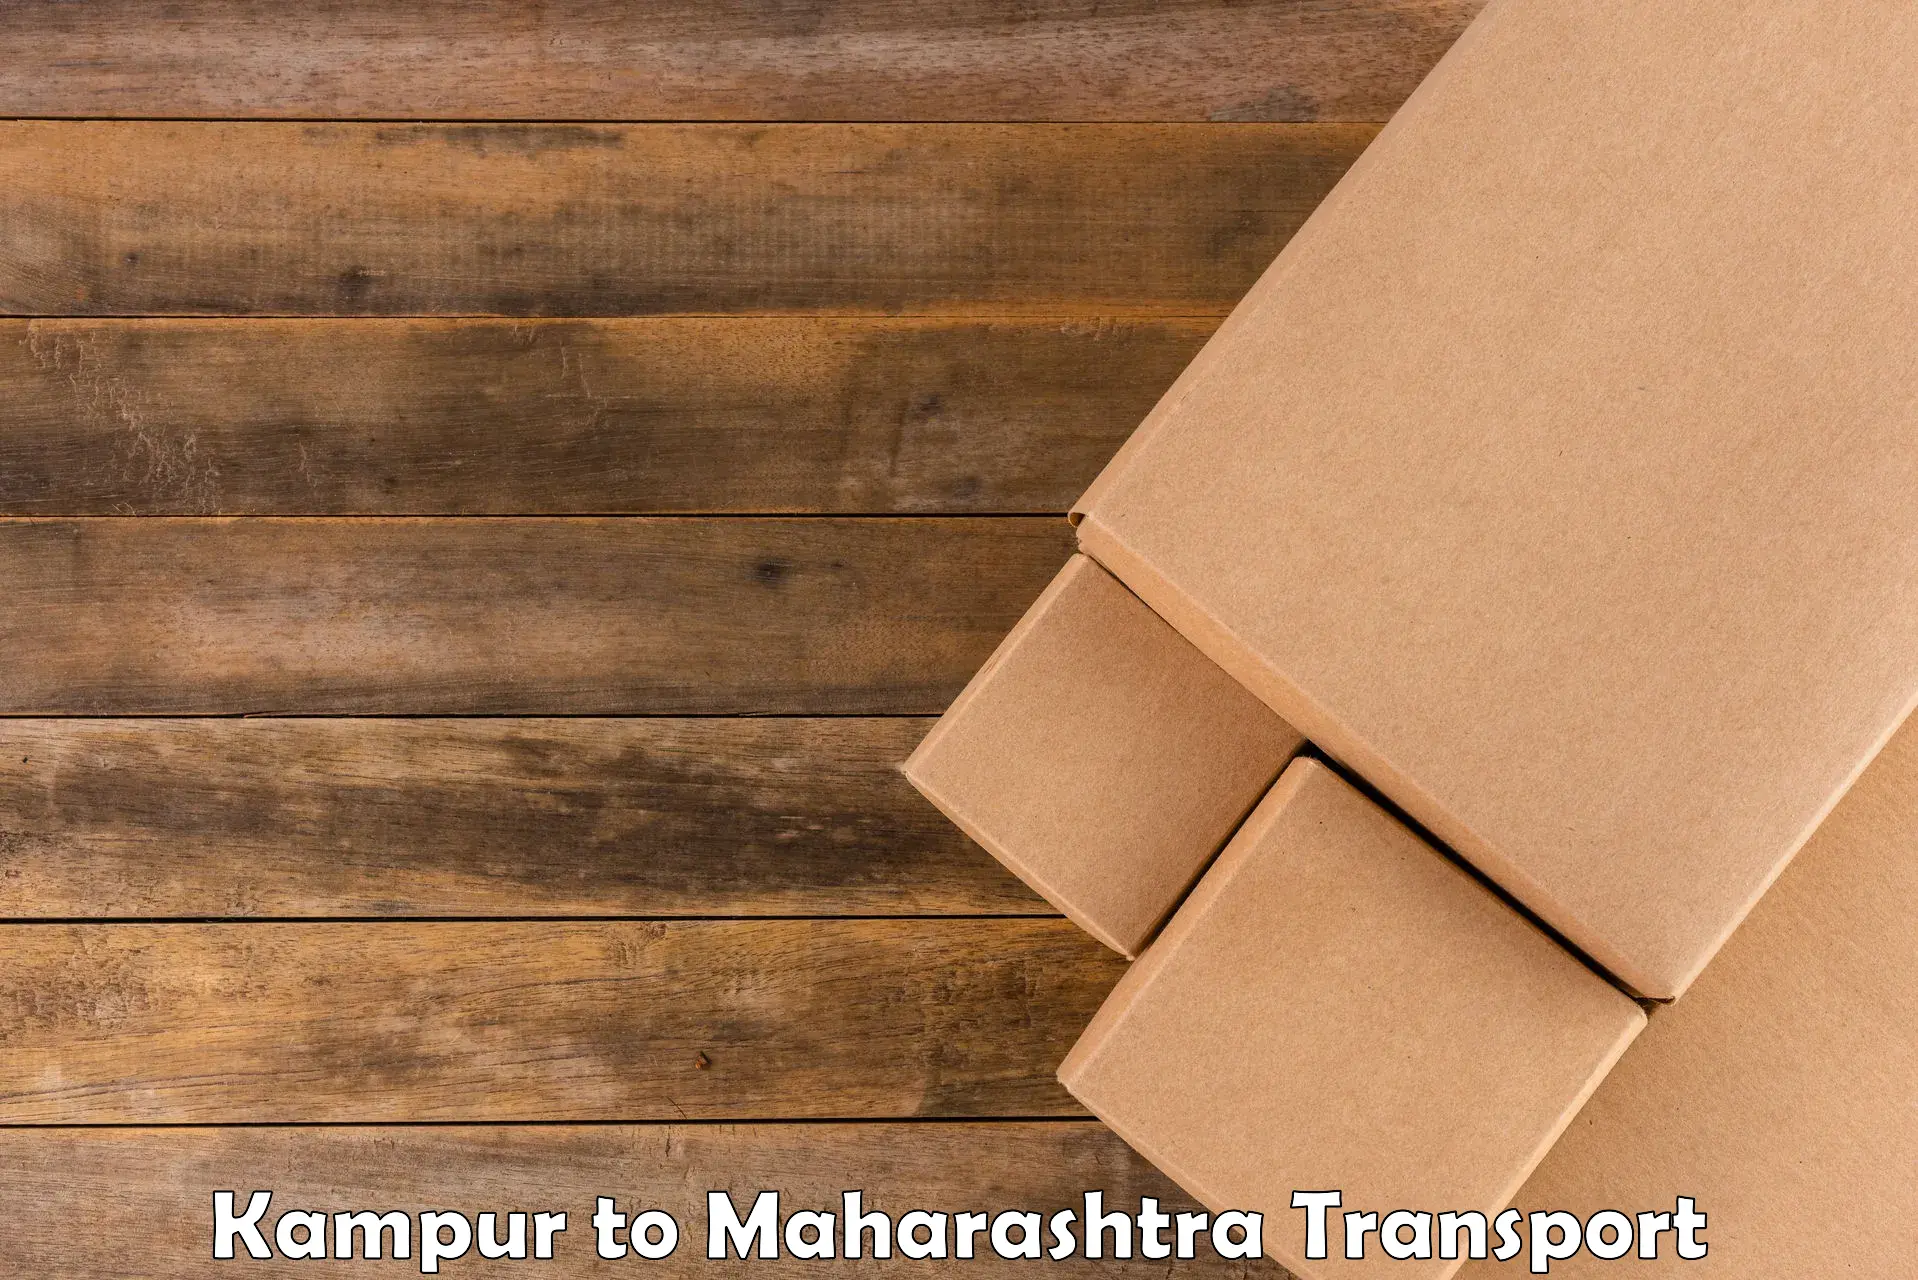 Container transport service Kampur to Pune